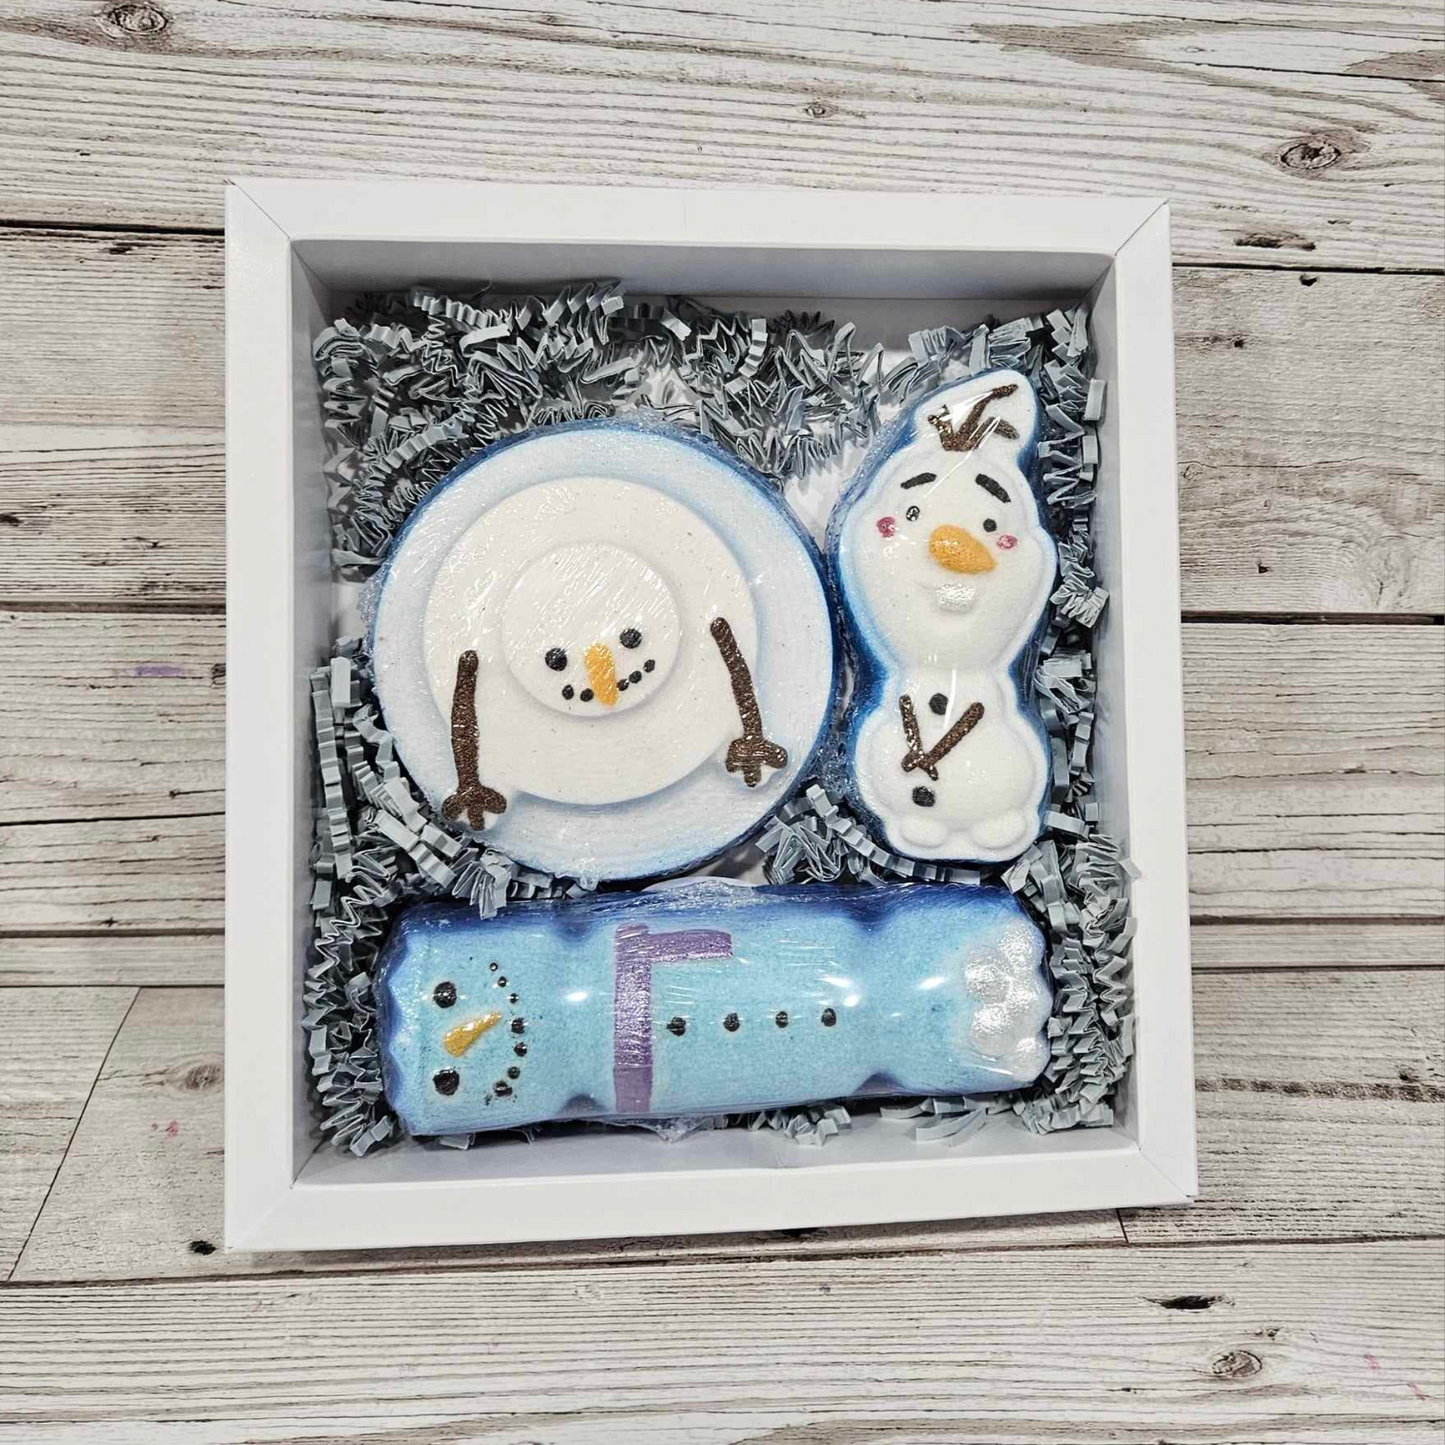 'Do you want to build a Snowman' Bath Bomb Gift Set